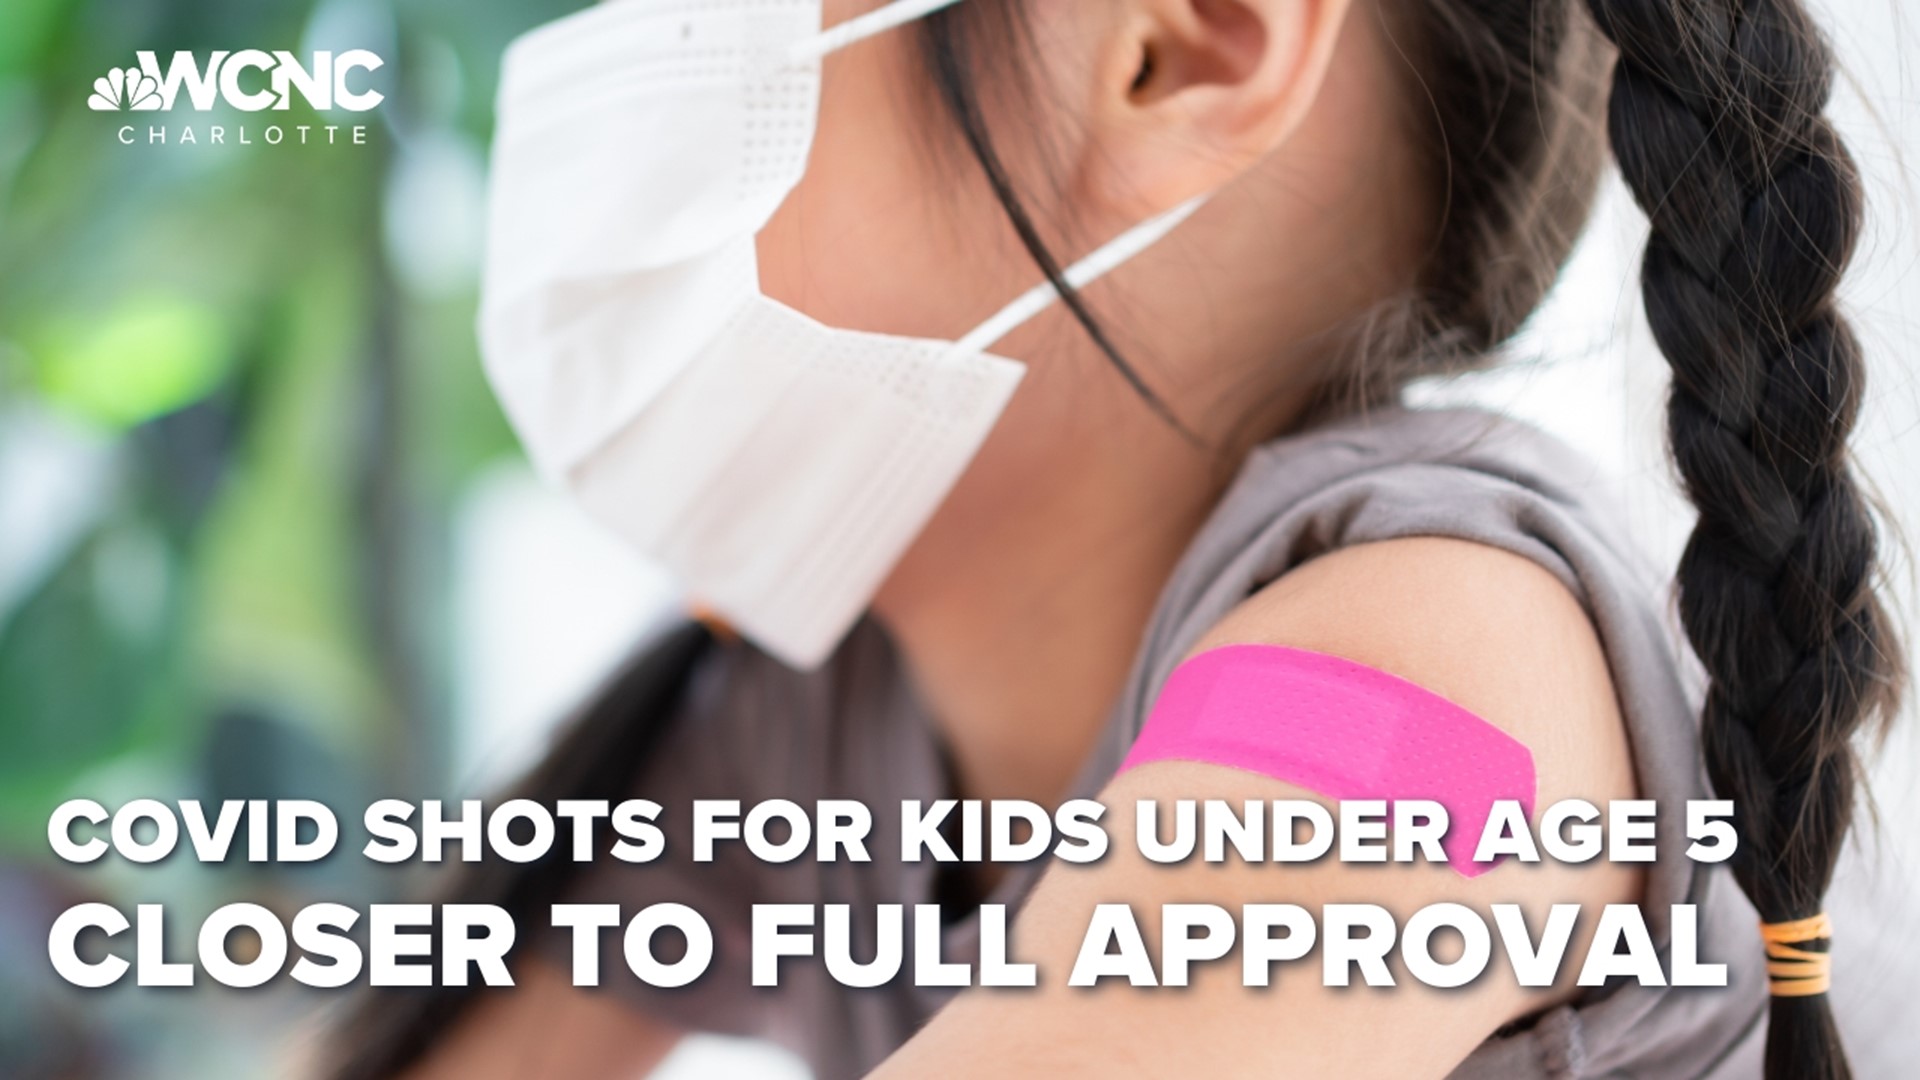 An FDA advisory committee unanimously concluded that the benefits outweigh the risks for vaccines in young children.